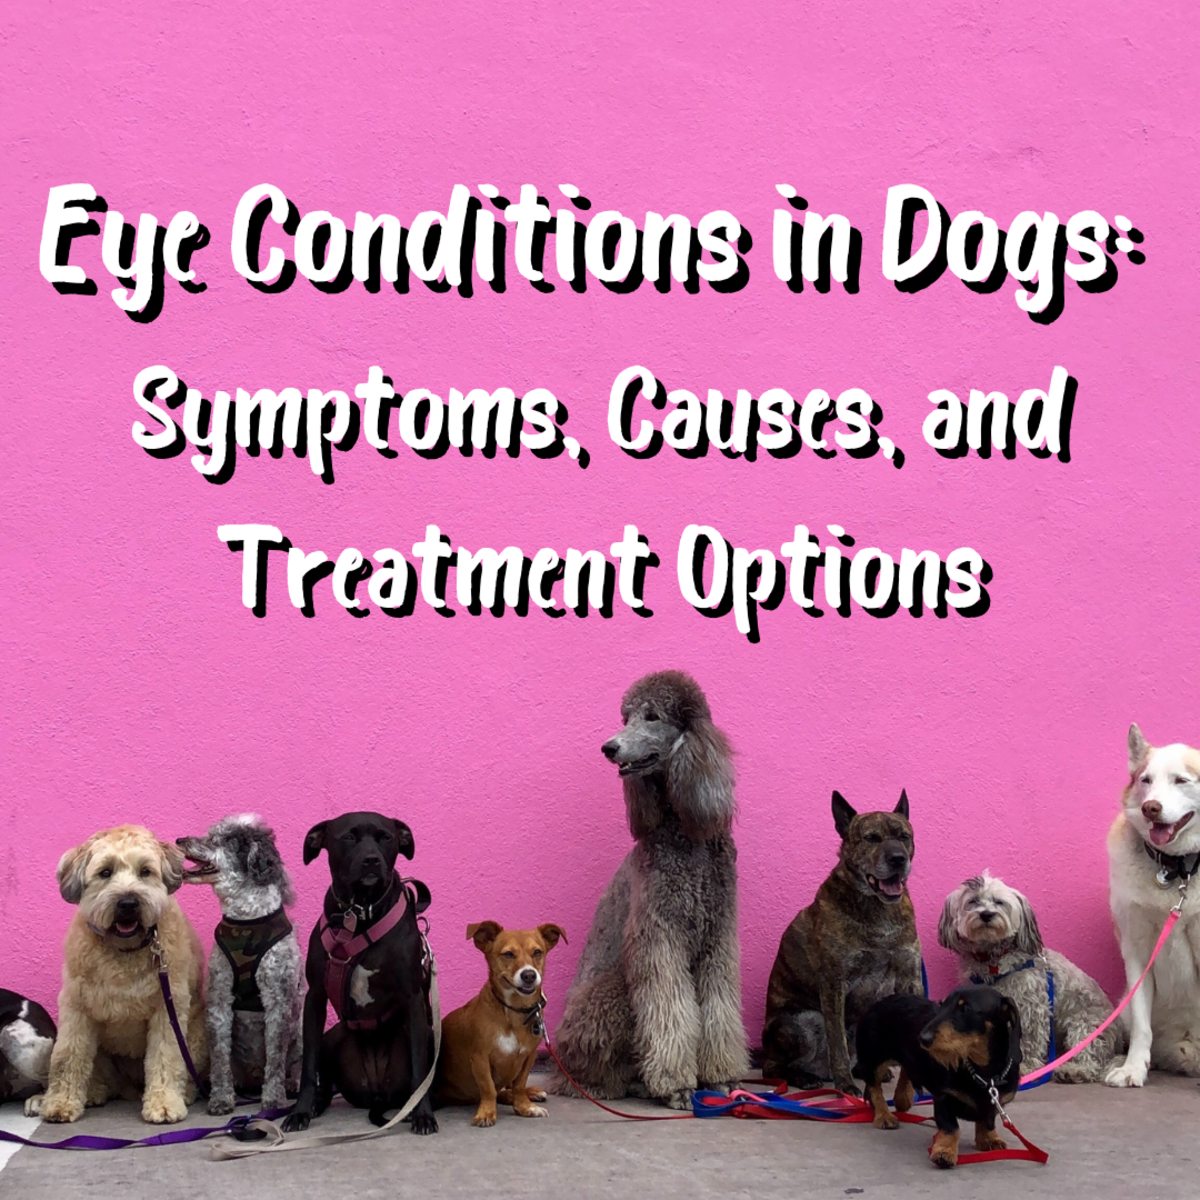 Have you ever seen film on dogs eyes and wondered what it was? Read on to learn some possible answers, plus much more info on 5 prevalent eye conditions in canines.